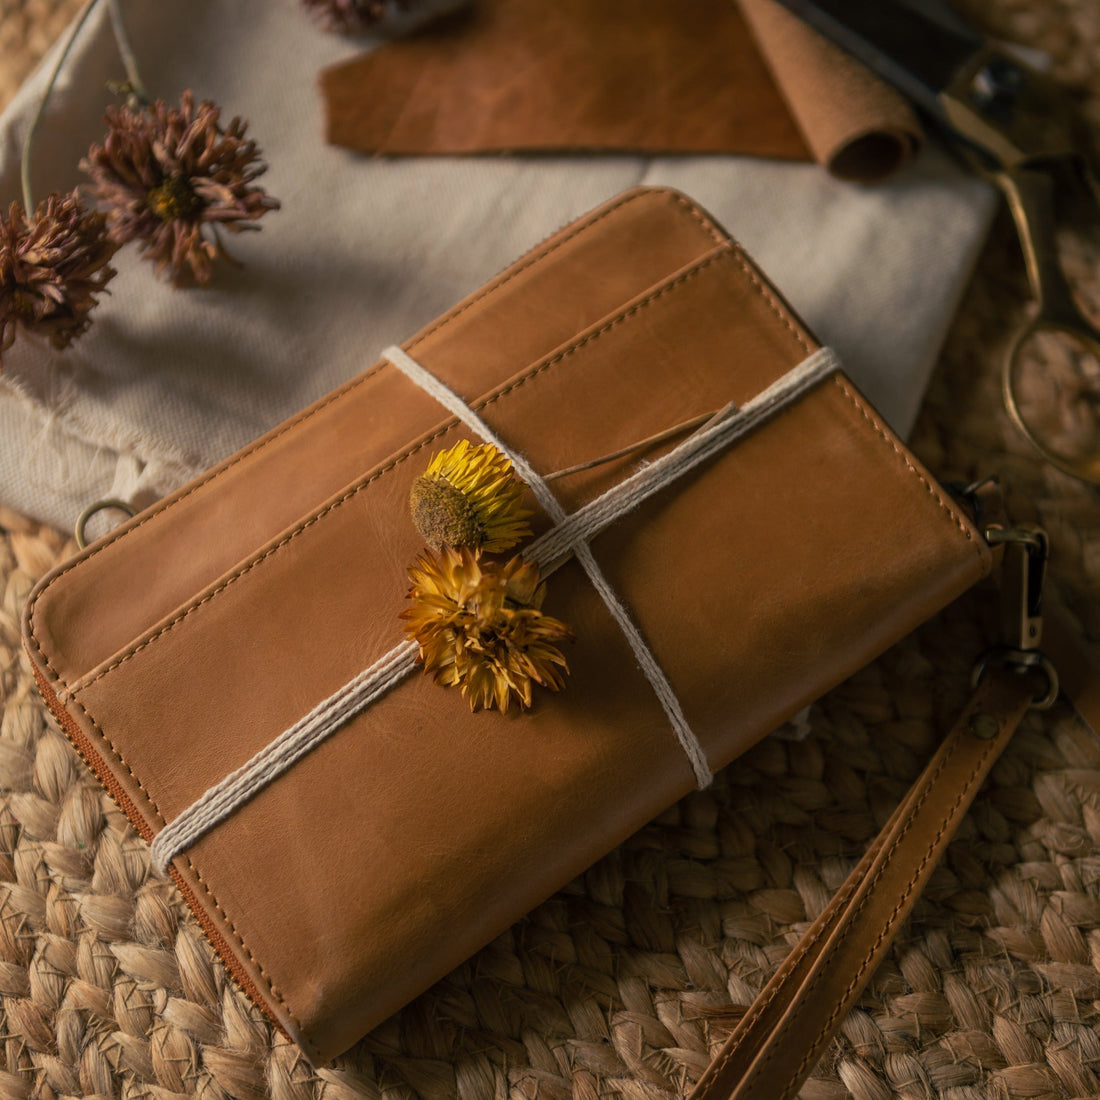 Wallets & Pouches fair trade ethical sustainable fashion Camel Brown Leather Wallet Crossbody conscious purchase JOYN